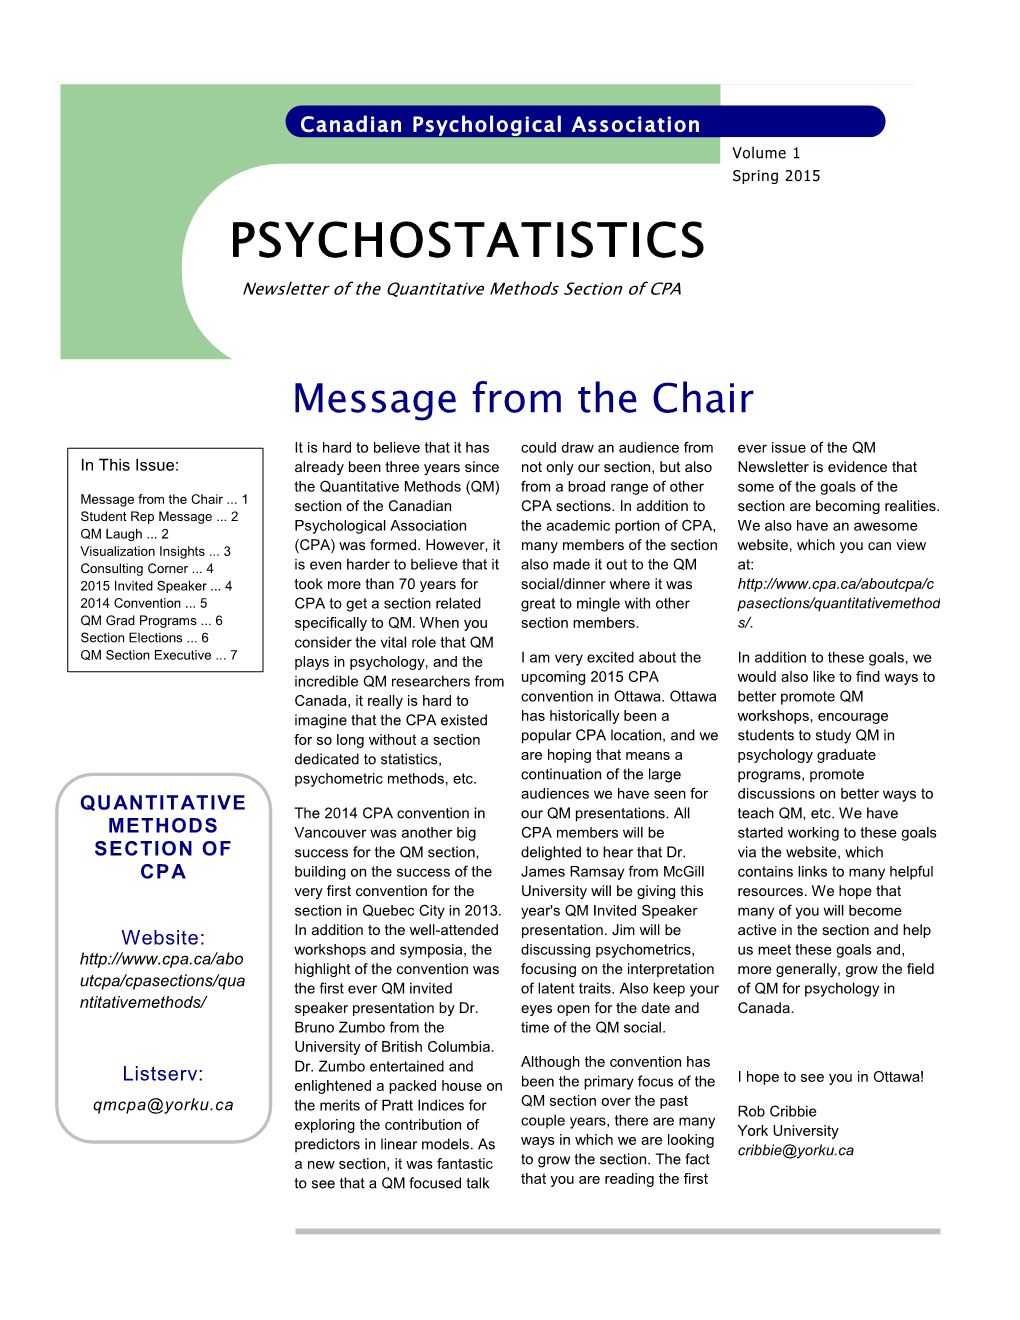 2015 PSYCHOSTATISTICS Newsletter of the Quantitative Methods Section of CPA